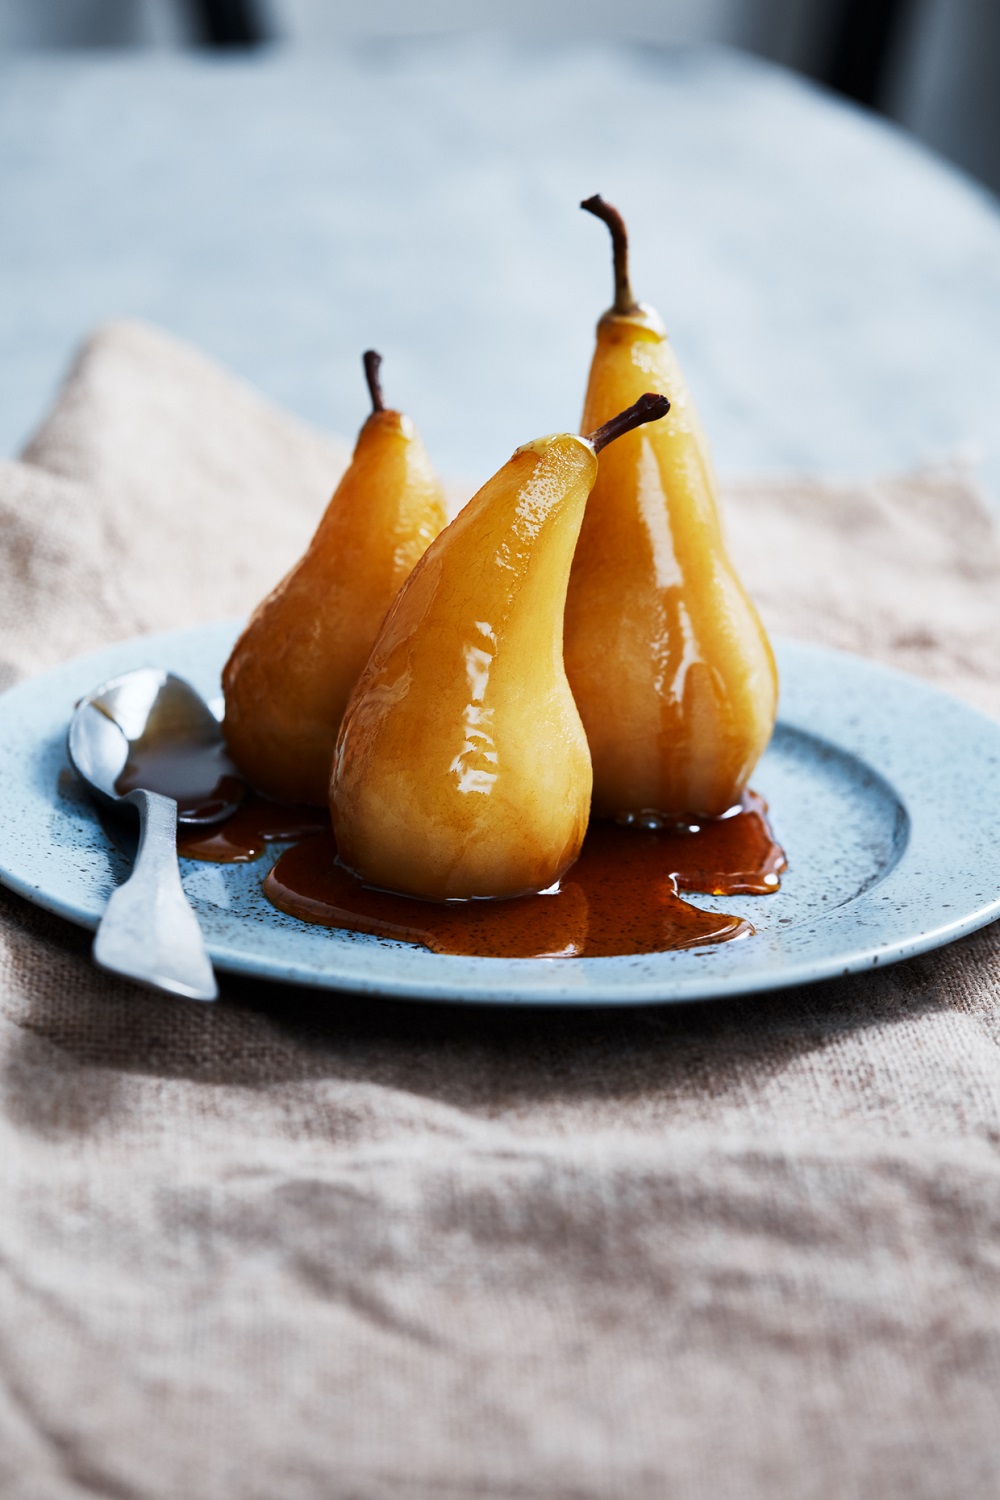 A Recipe From Milly's Cookbook: Cinnamon And Chai Tea Poached South African Pears